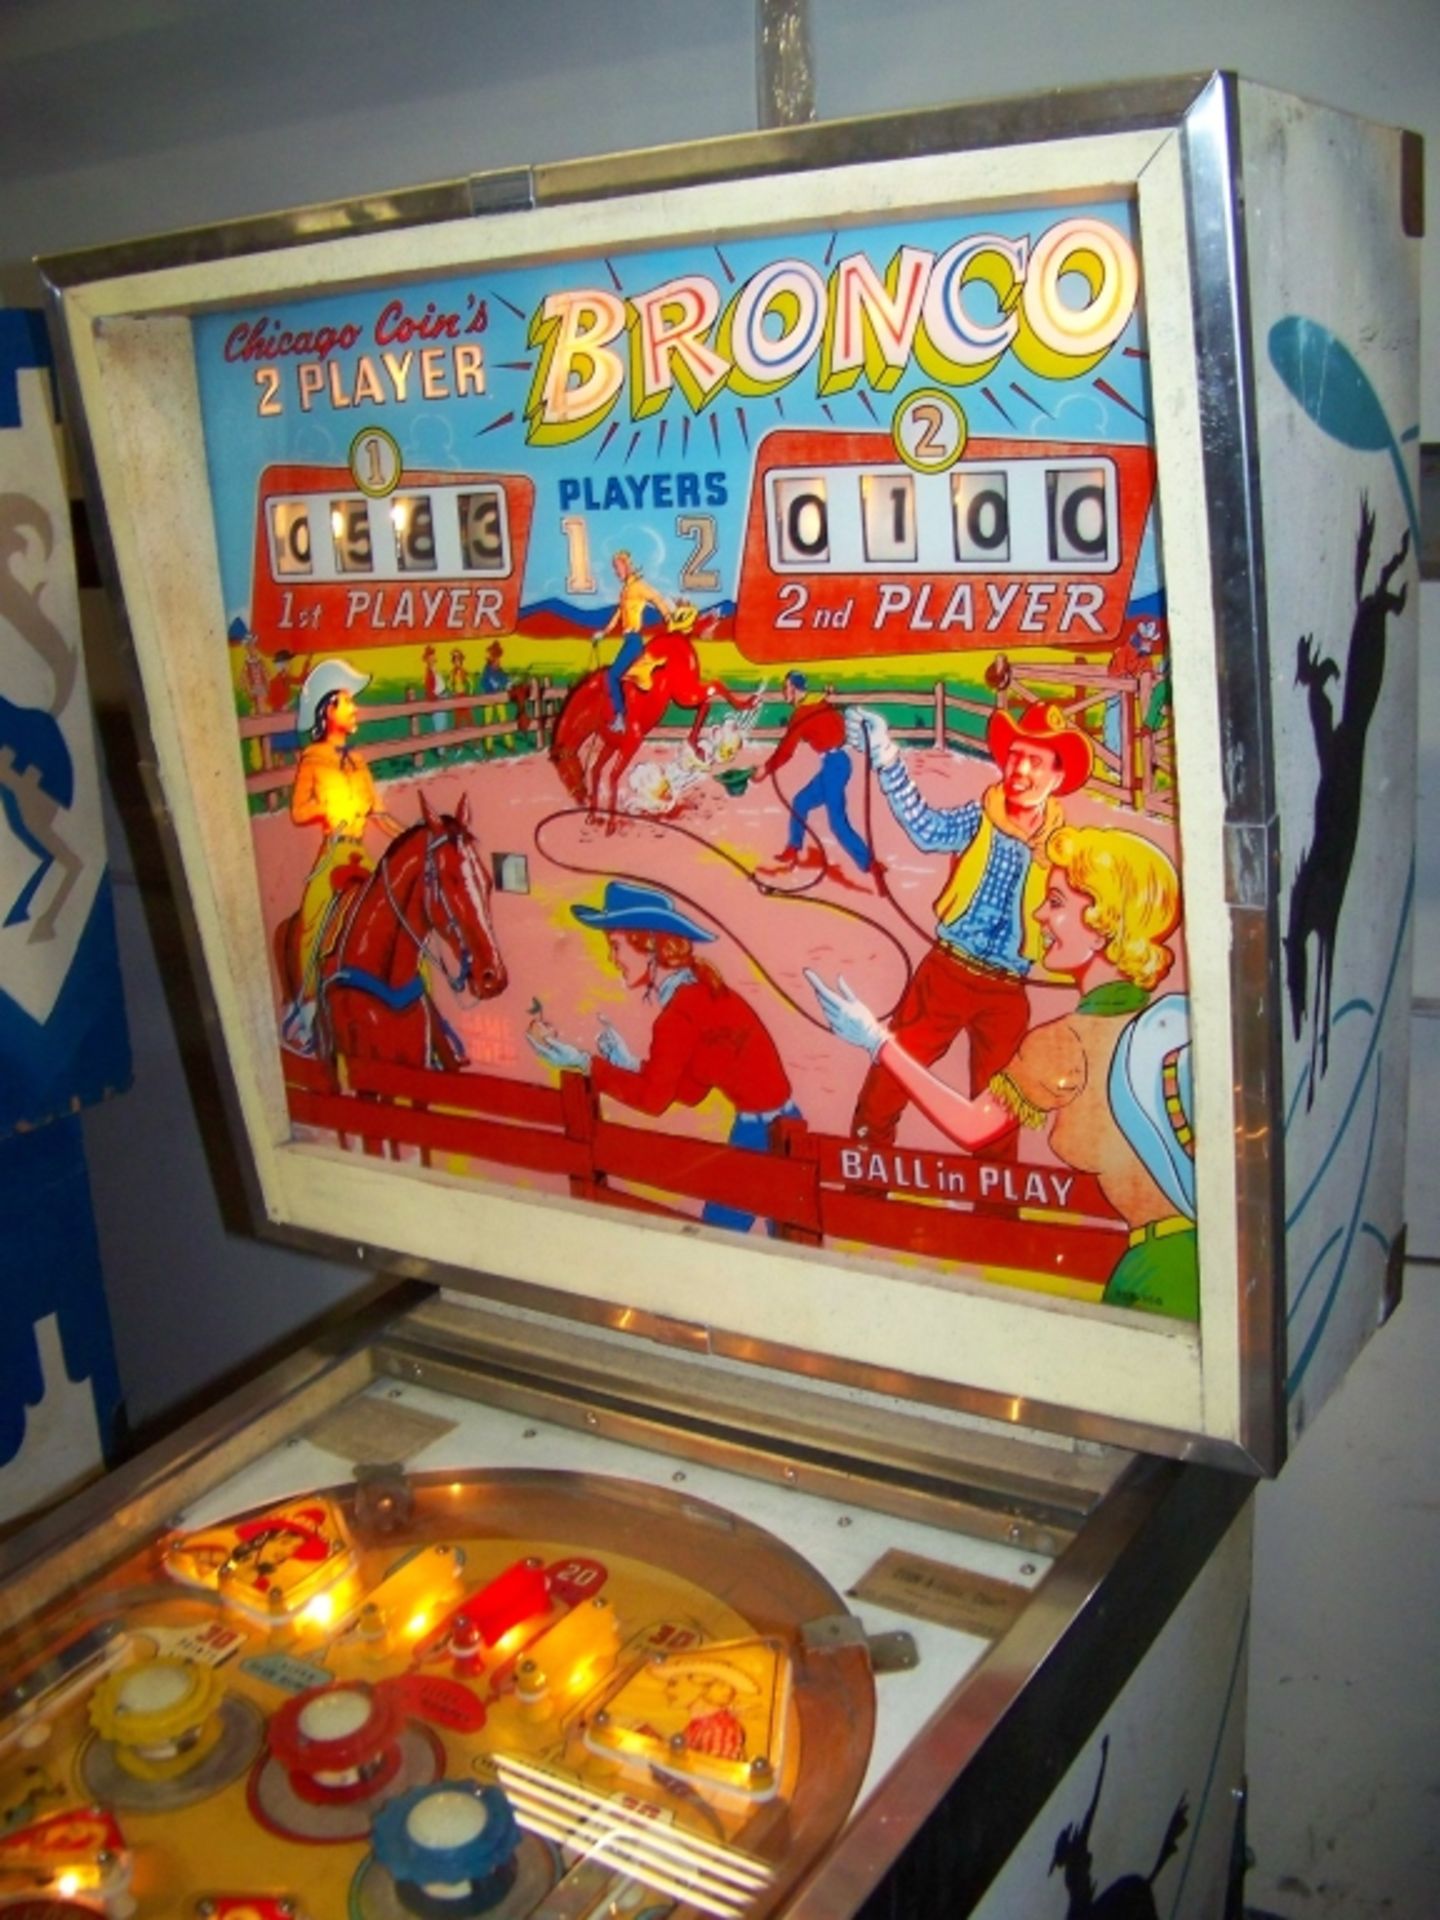 BRONCO PINBALL MACHINE CHICAGO COIN 1963 Item is in used condition. Evidence of wear and - Image 3 of 8